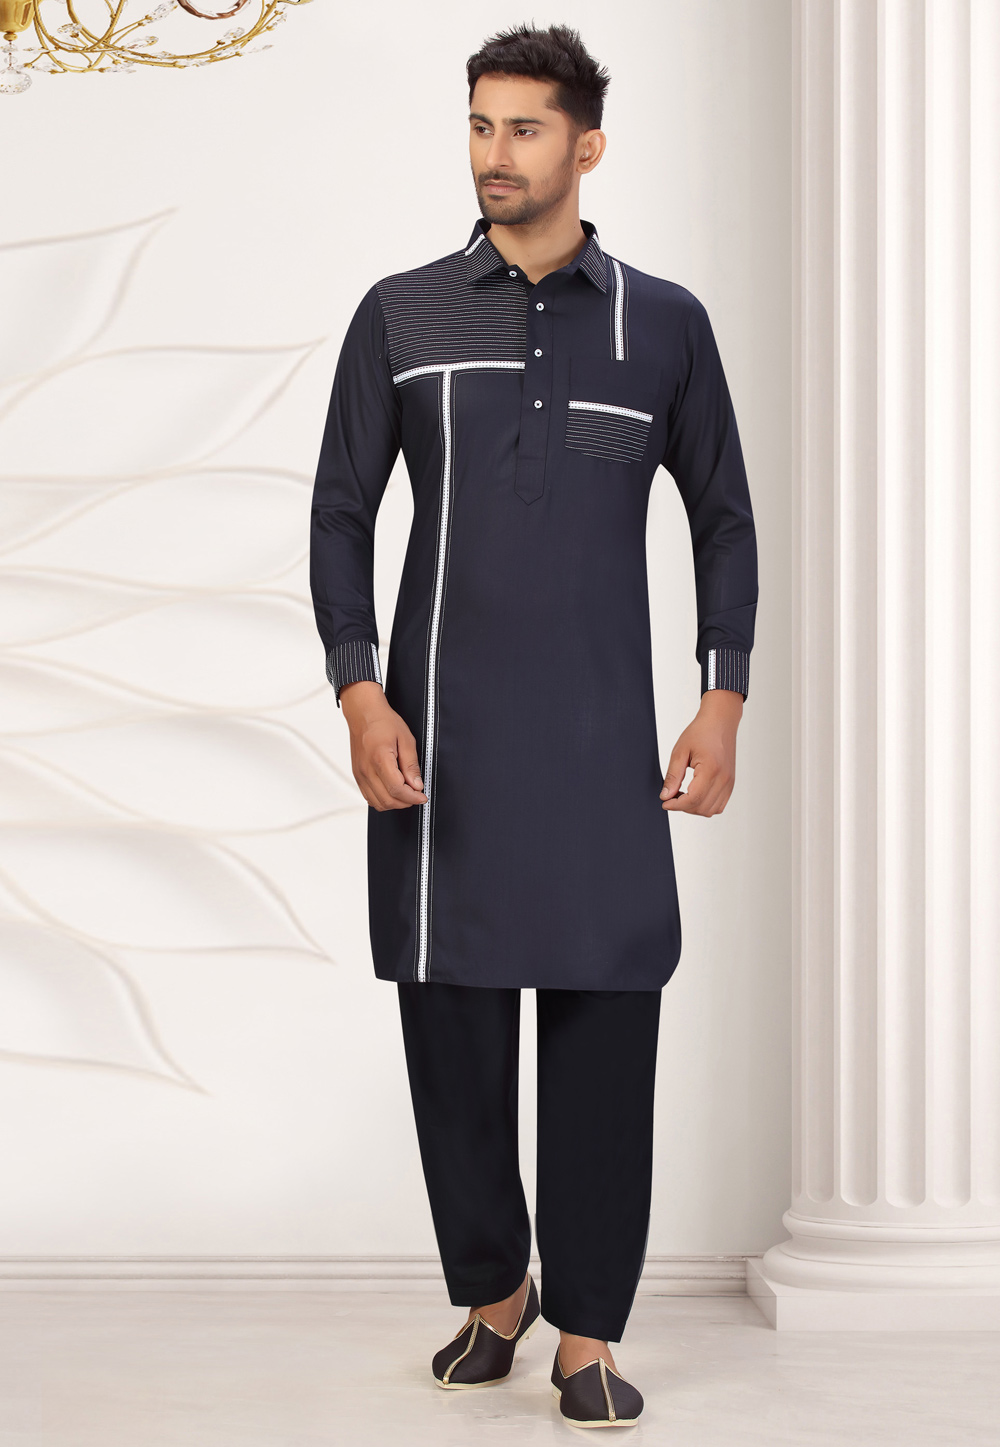 Trendy Pathani Suit Styles for Men: The Latest Fashion